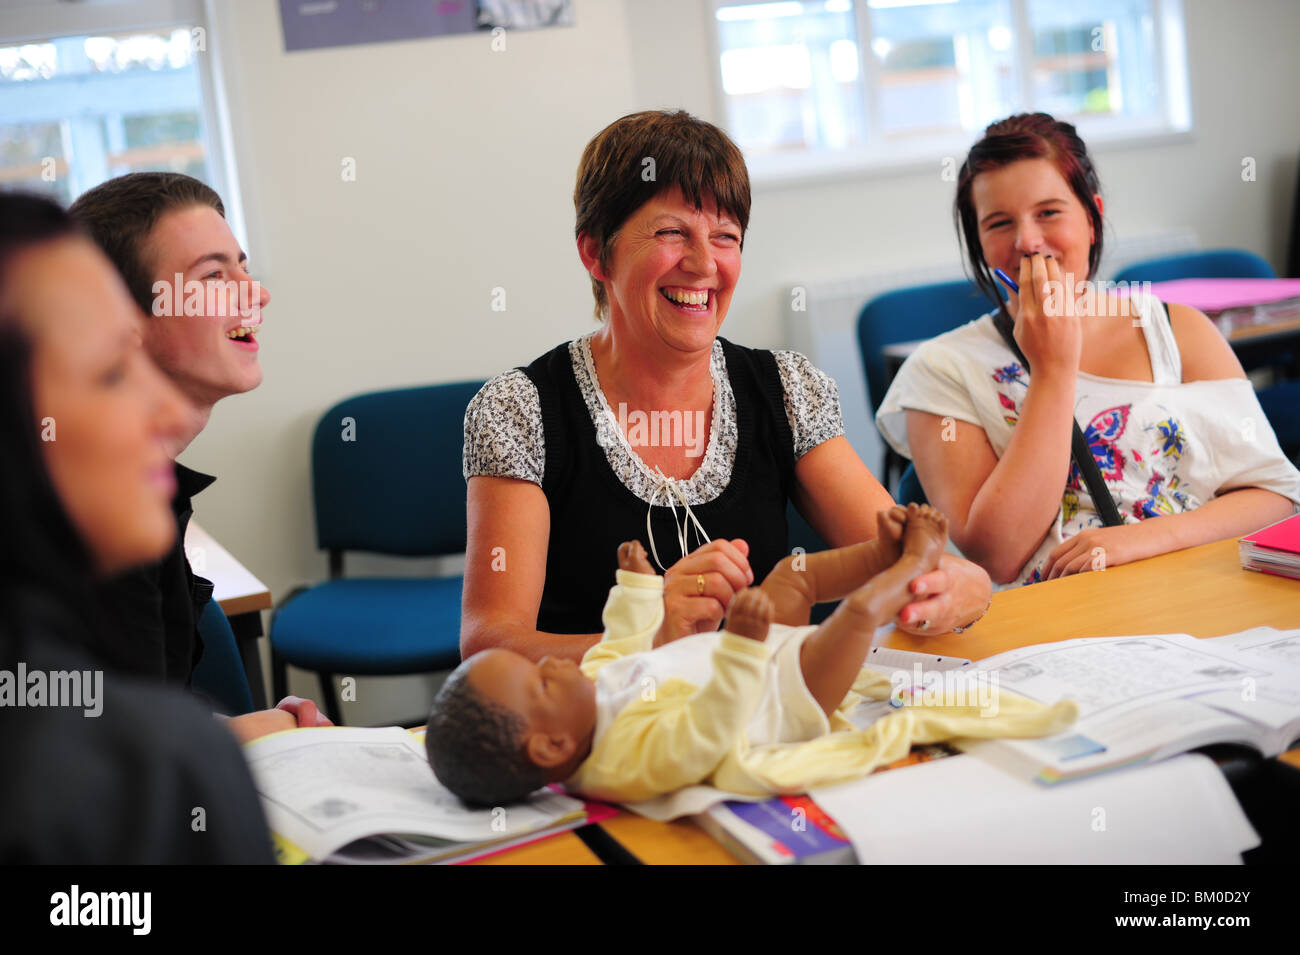 A teacher talking to pupils about motherhood and having a baby with a doll Stock Photo